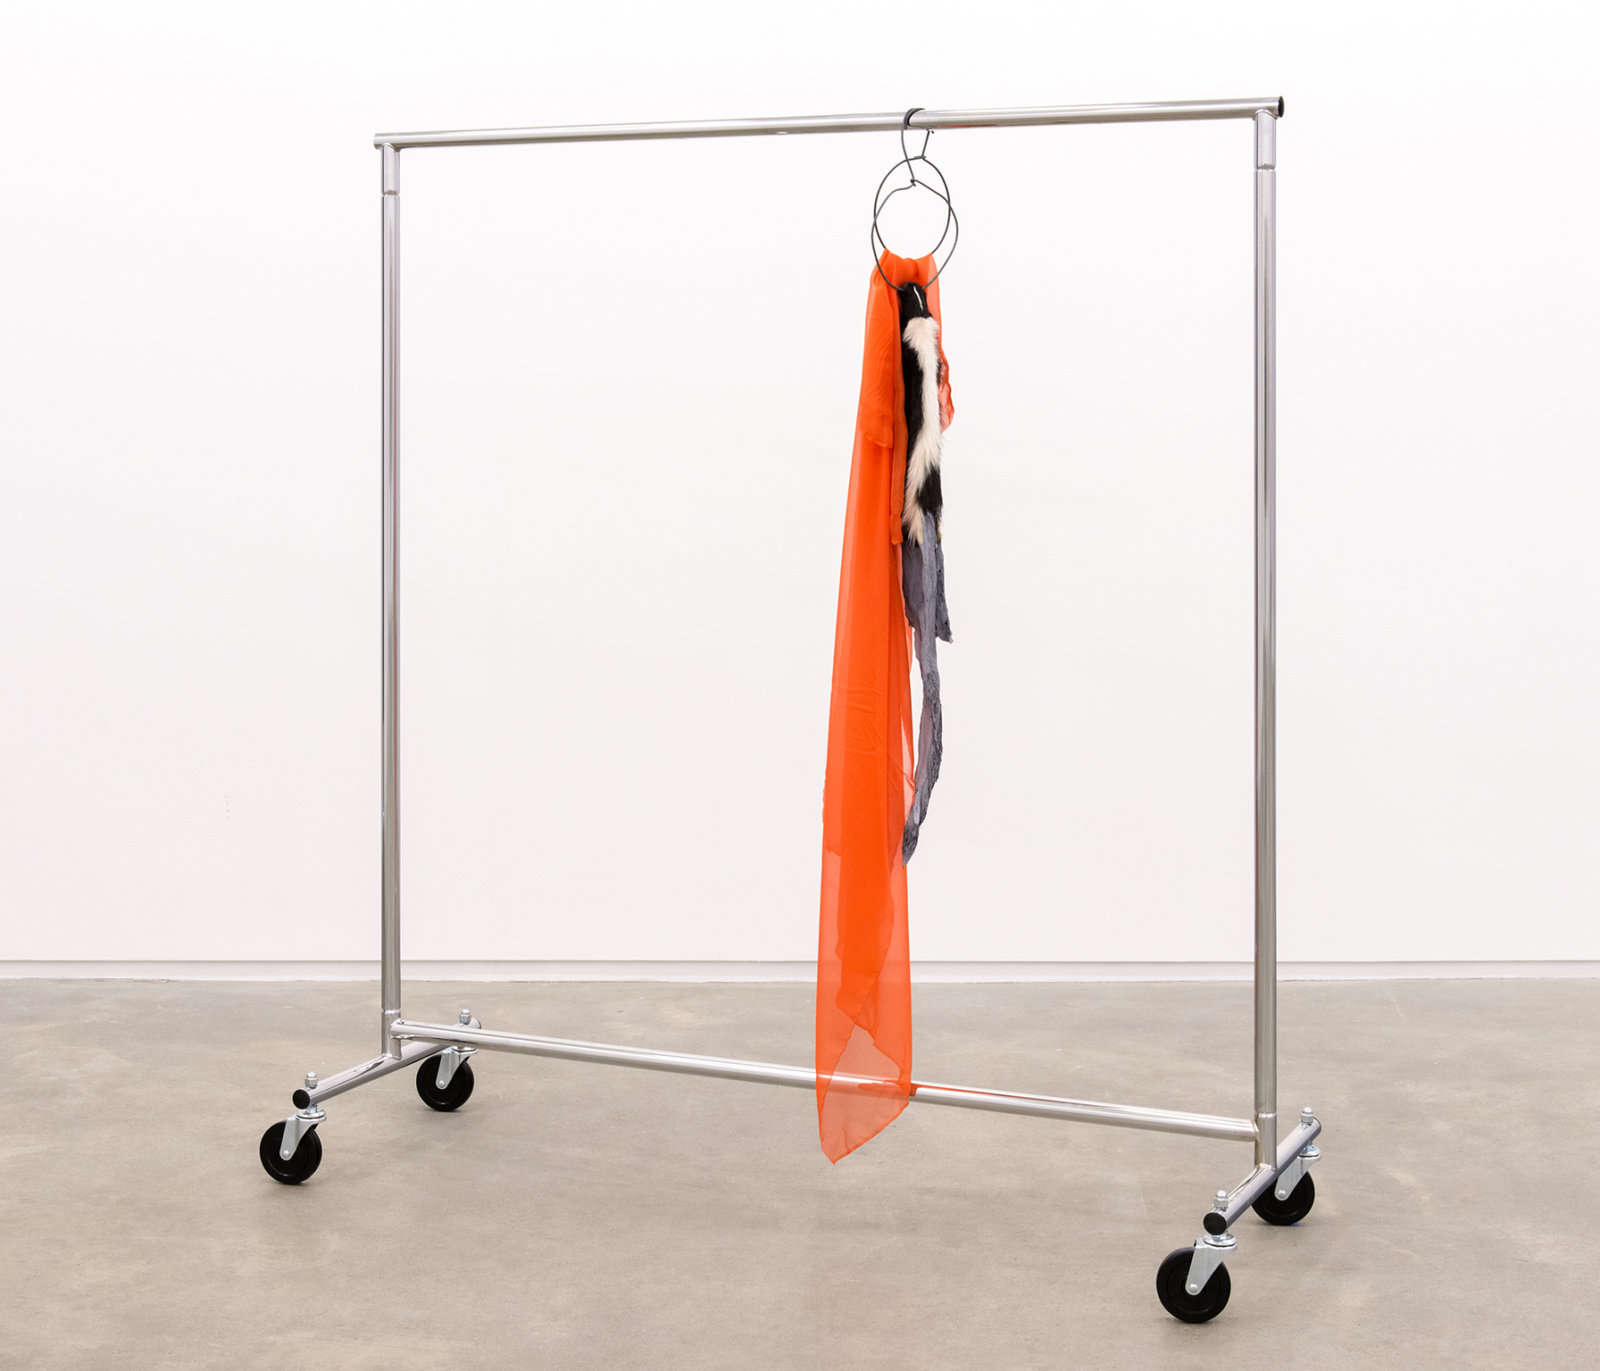 Duane Linklater, The most beautiful thing in the world, 2014, skunk fur, paint, garment rack, hangers, fabric, 66 x 60 x 20 in. (168 x 151 x 52 cm)